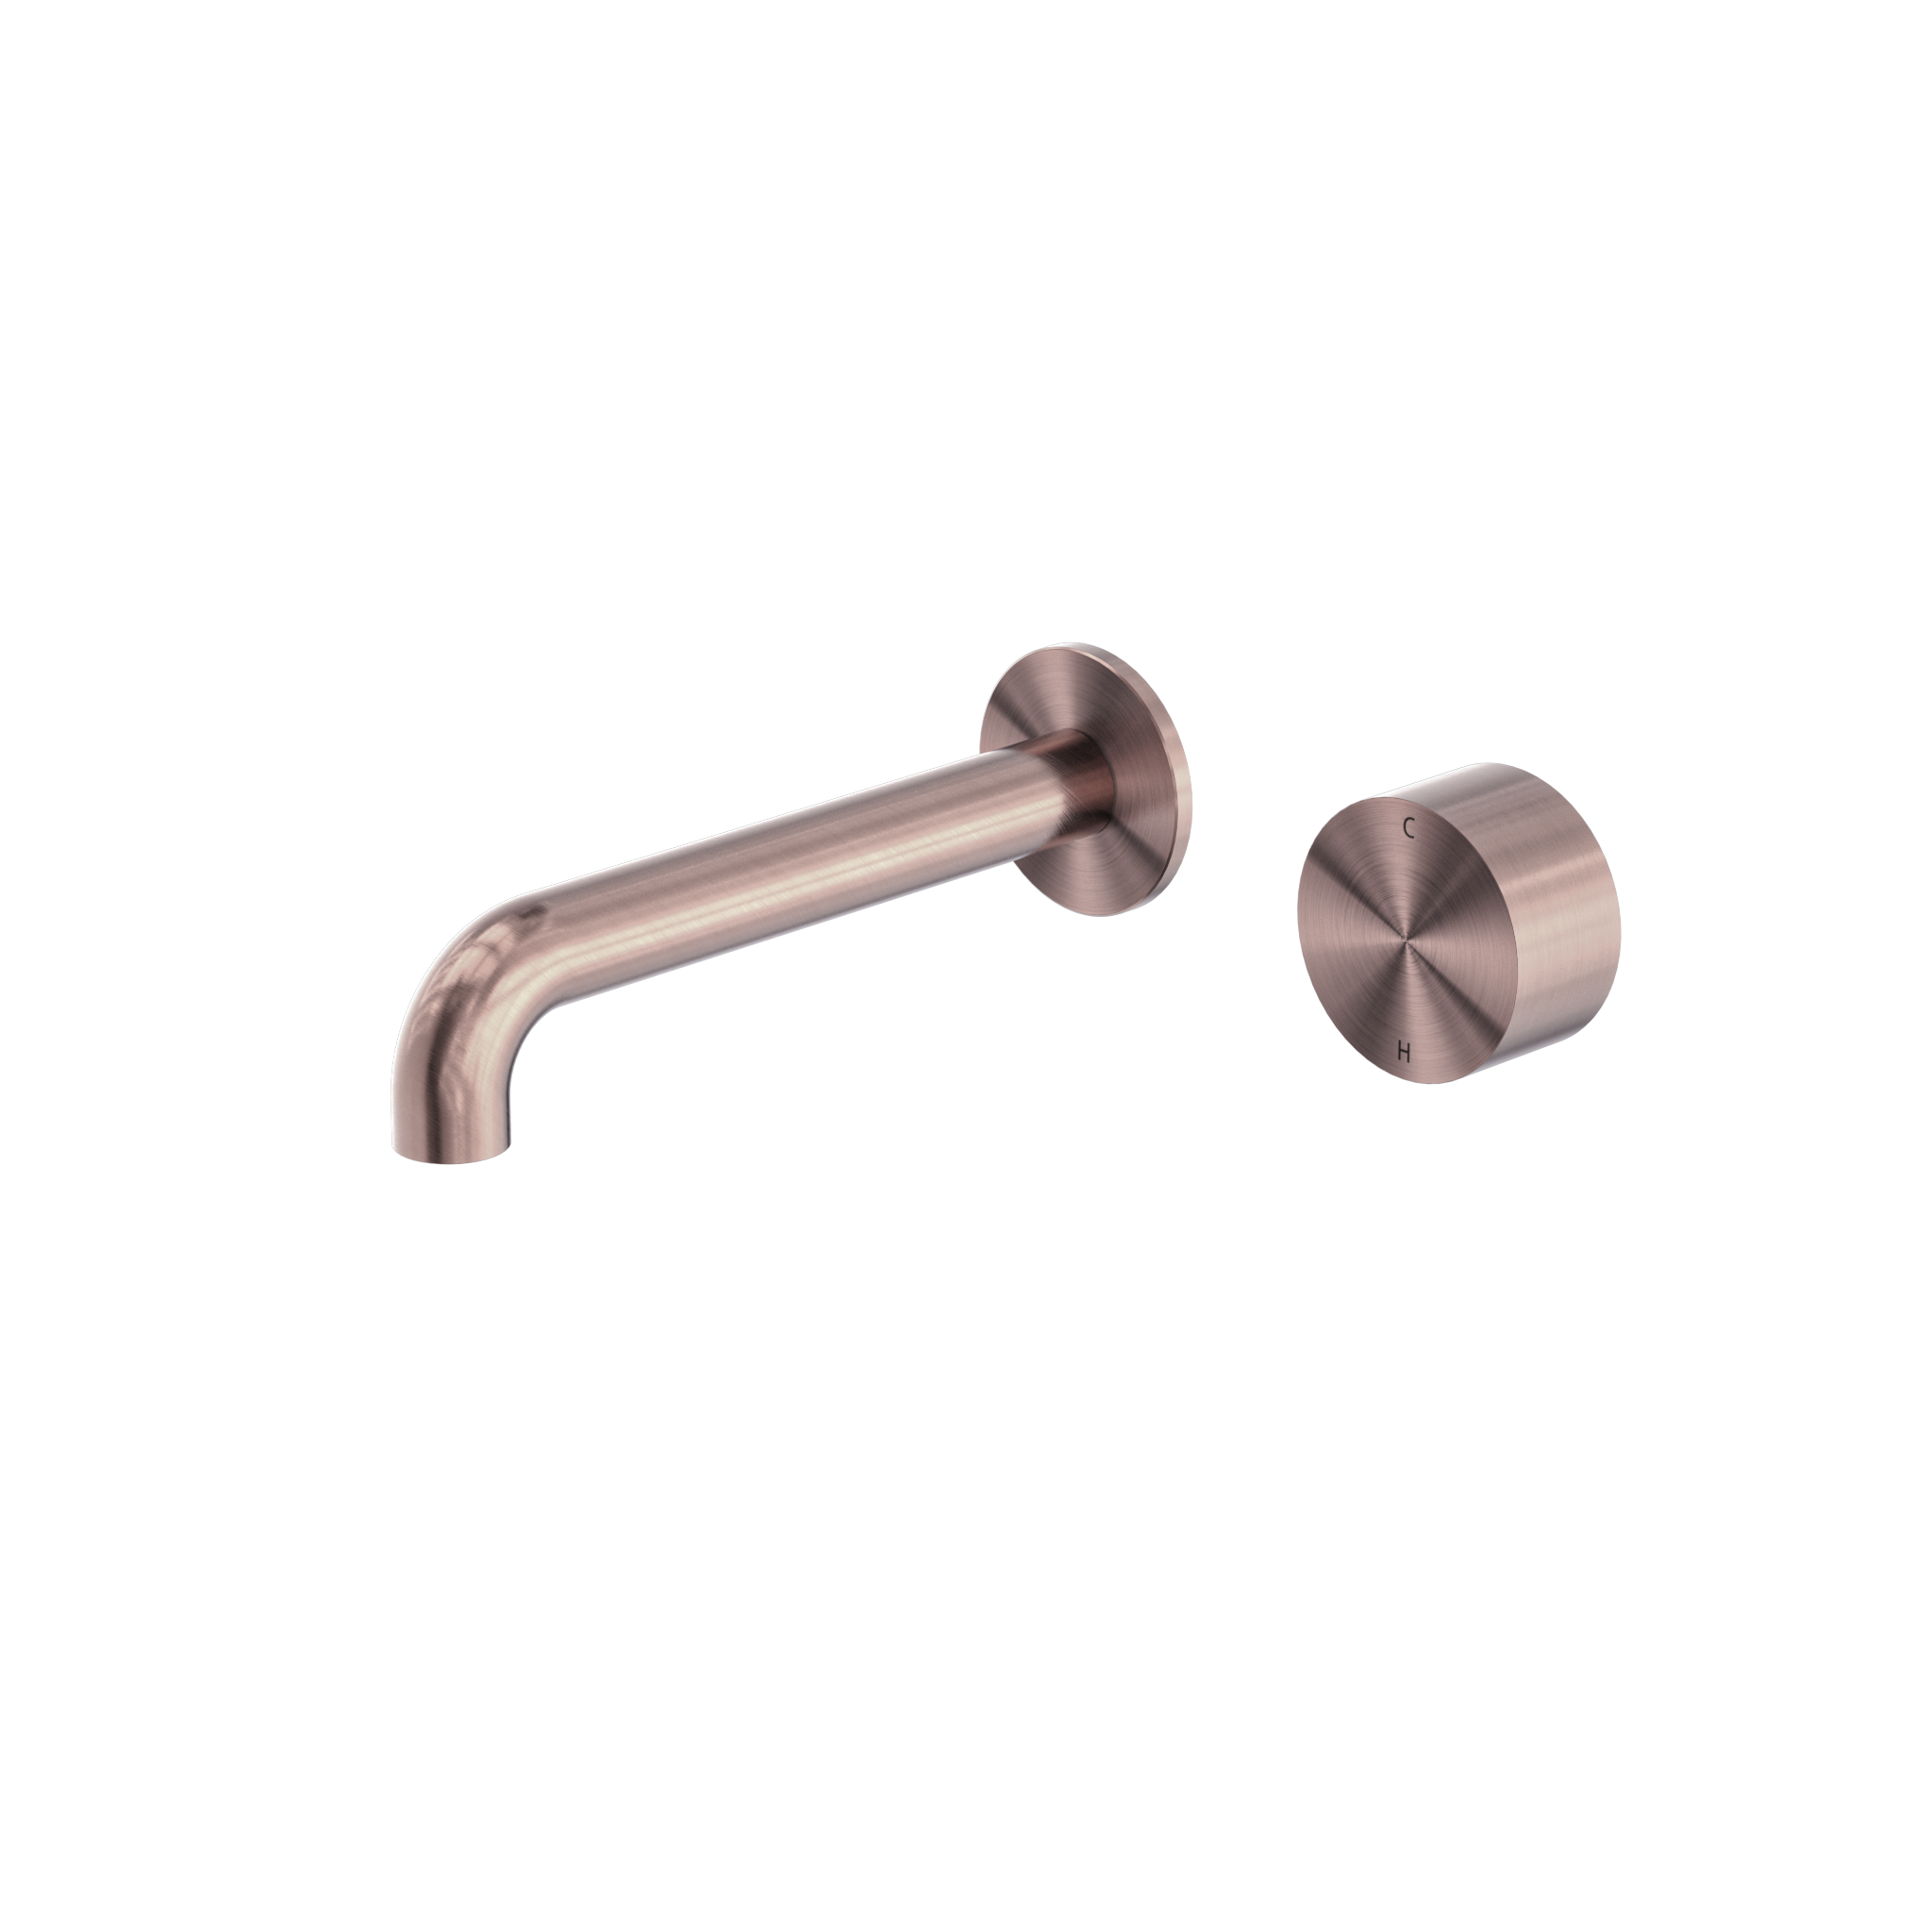 NERO KARA PROGRESSIVE WALL BASIN/ BATH SET BRUSHED BRONZE (AVAILABLE IN 120MM, 160MM, 185MM, 230MM AND 260MM)